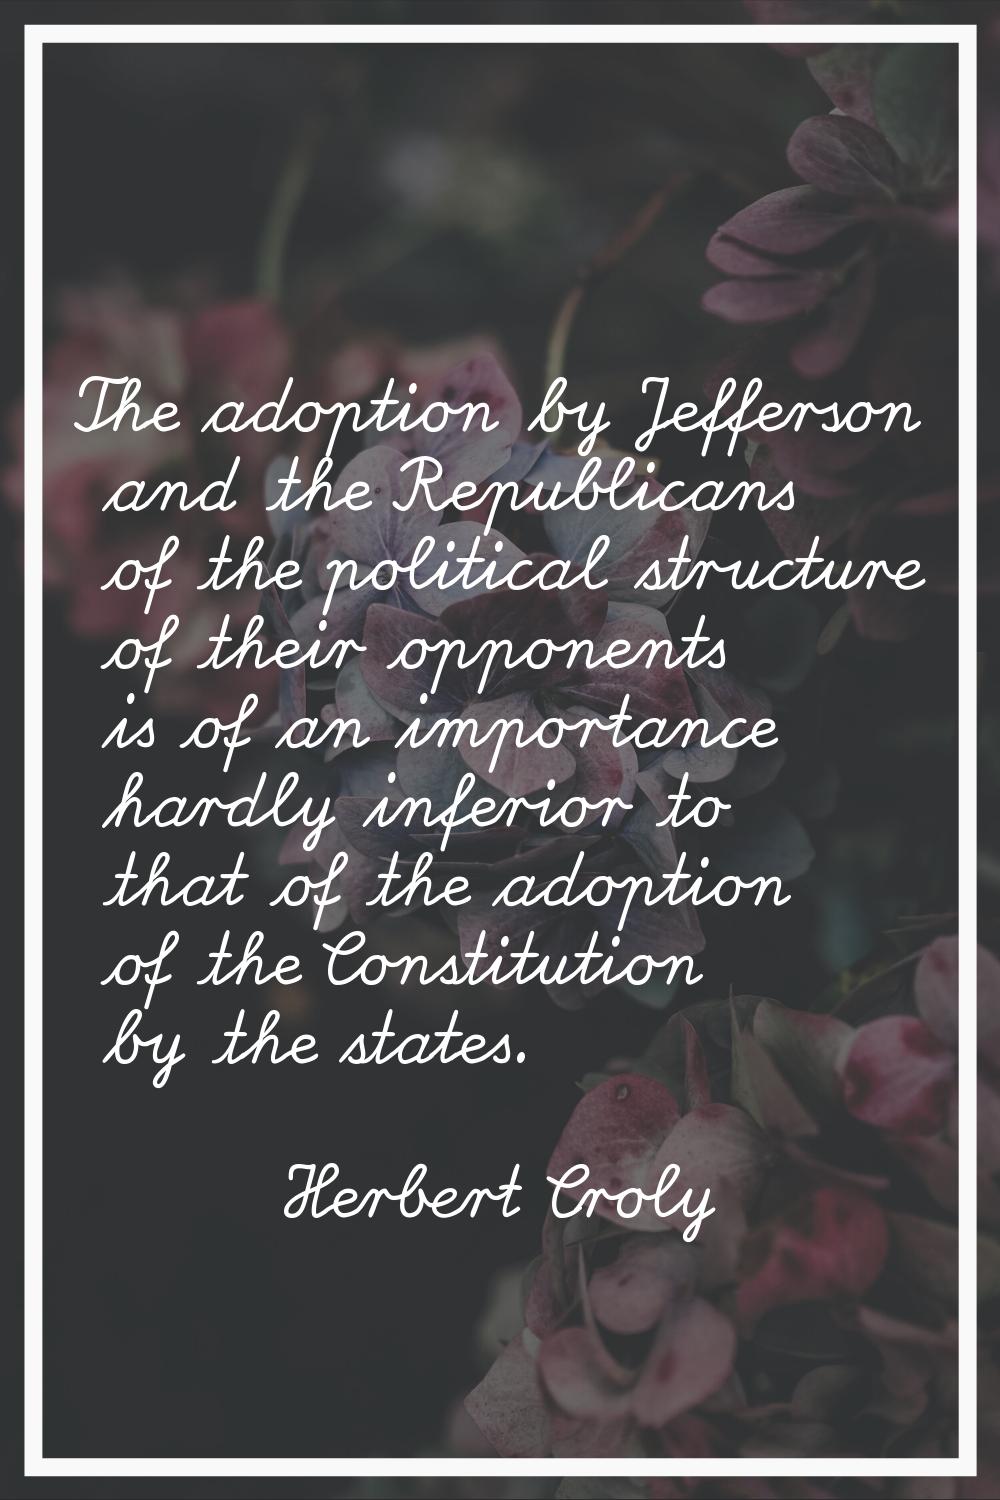 The adoption by Jefferson and the Republicans of the political structure of their opponents is of a